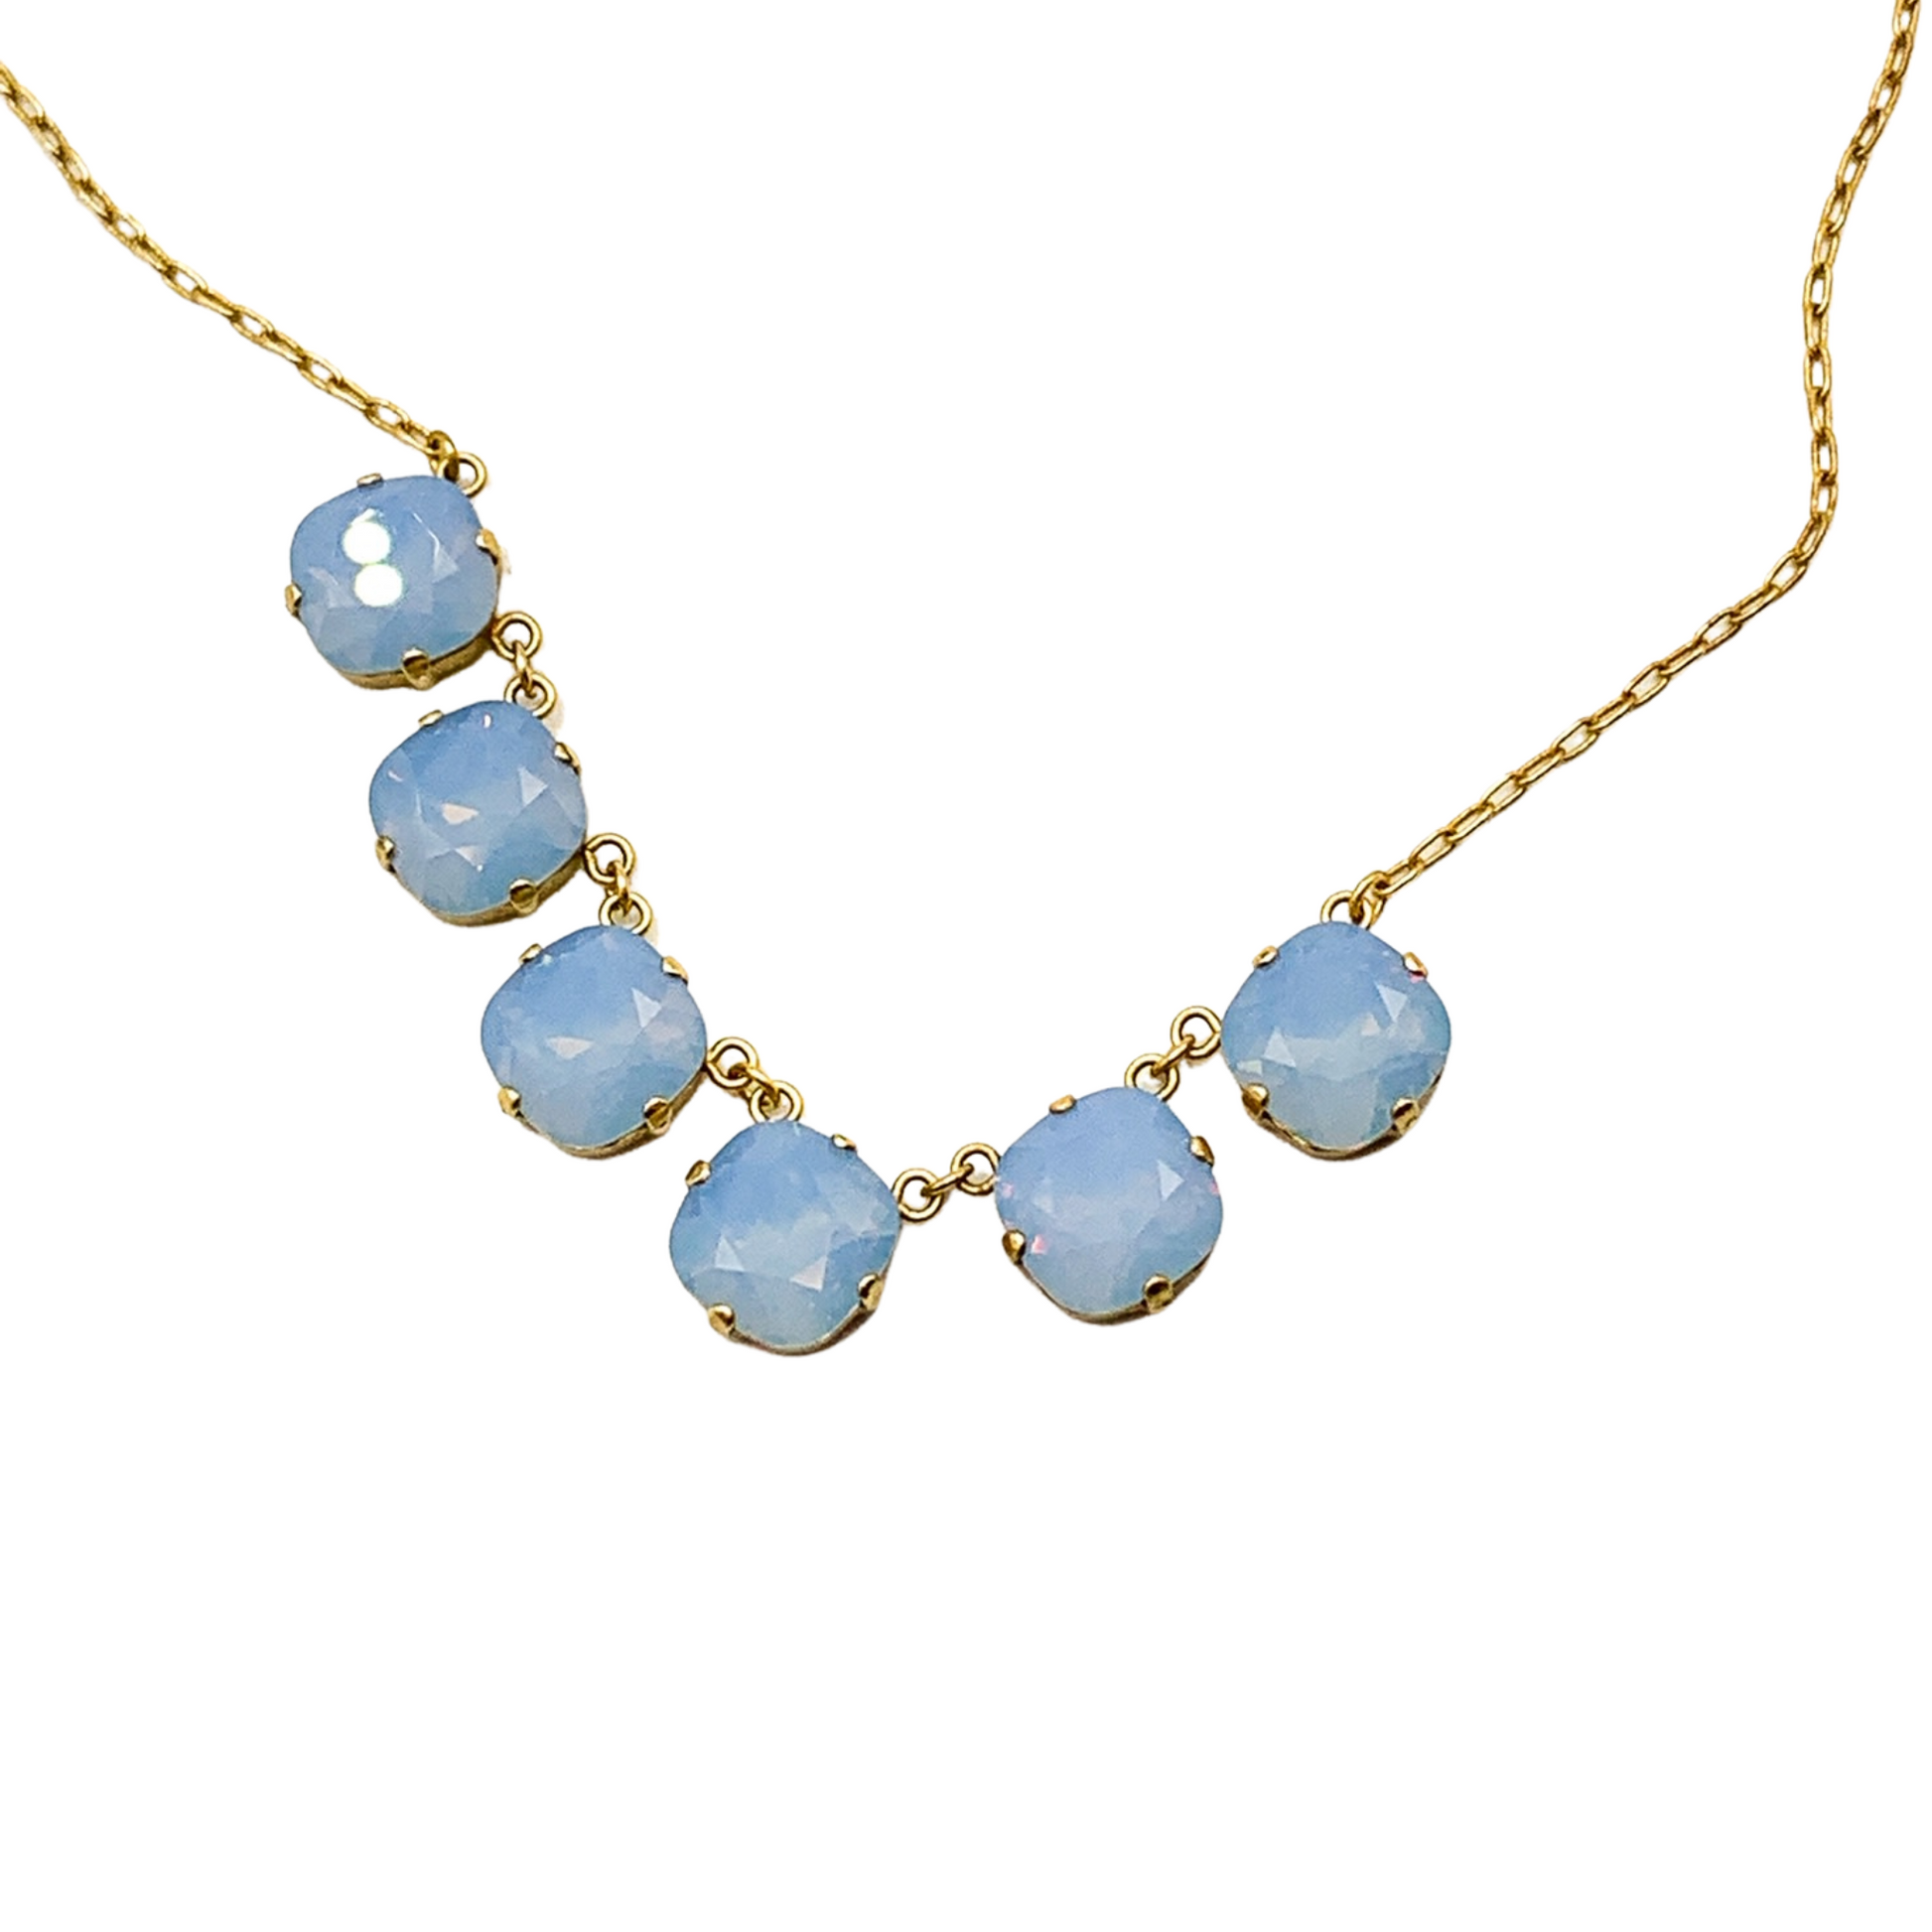 A closeup view of six light blue, translucent crystals on a gold chain.